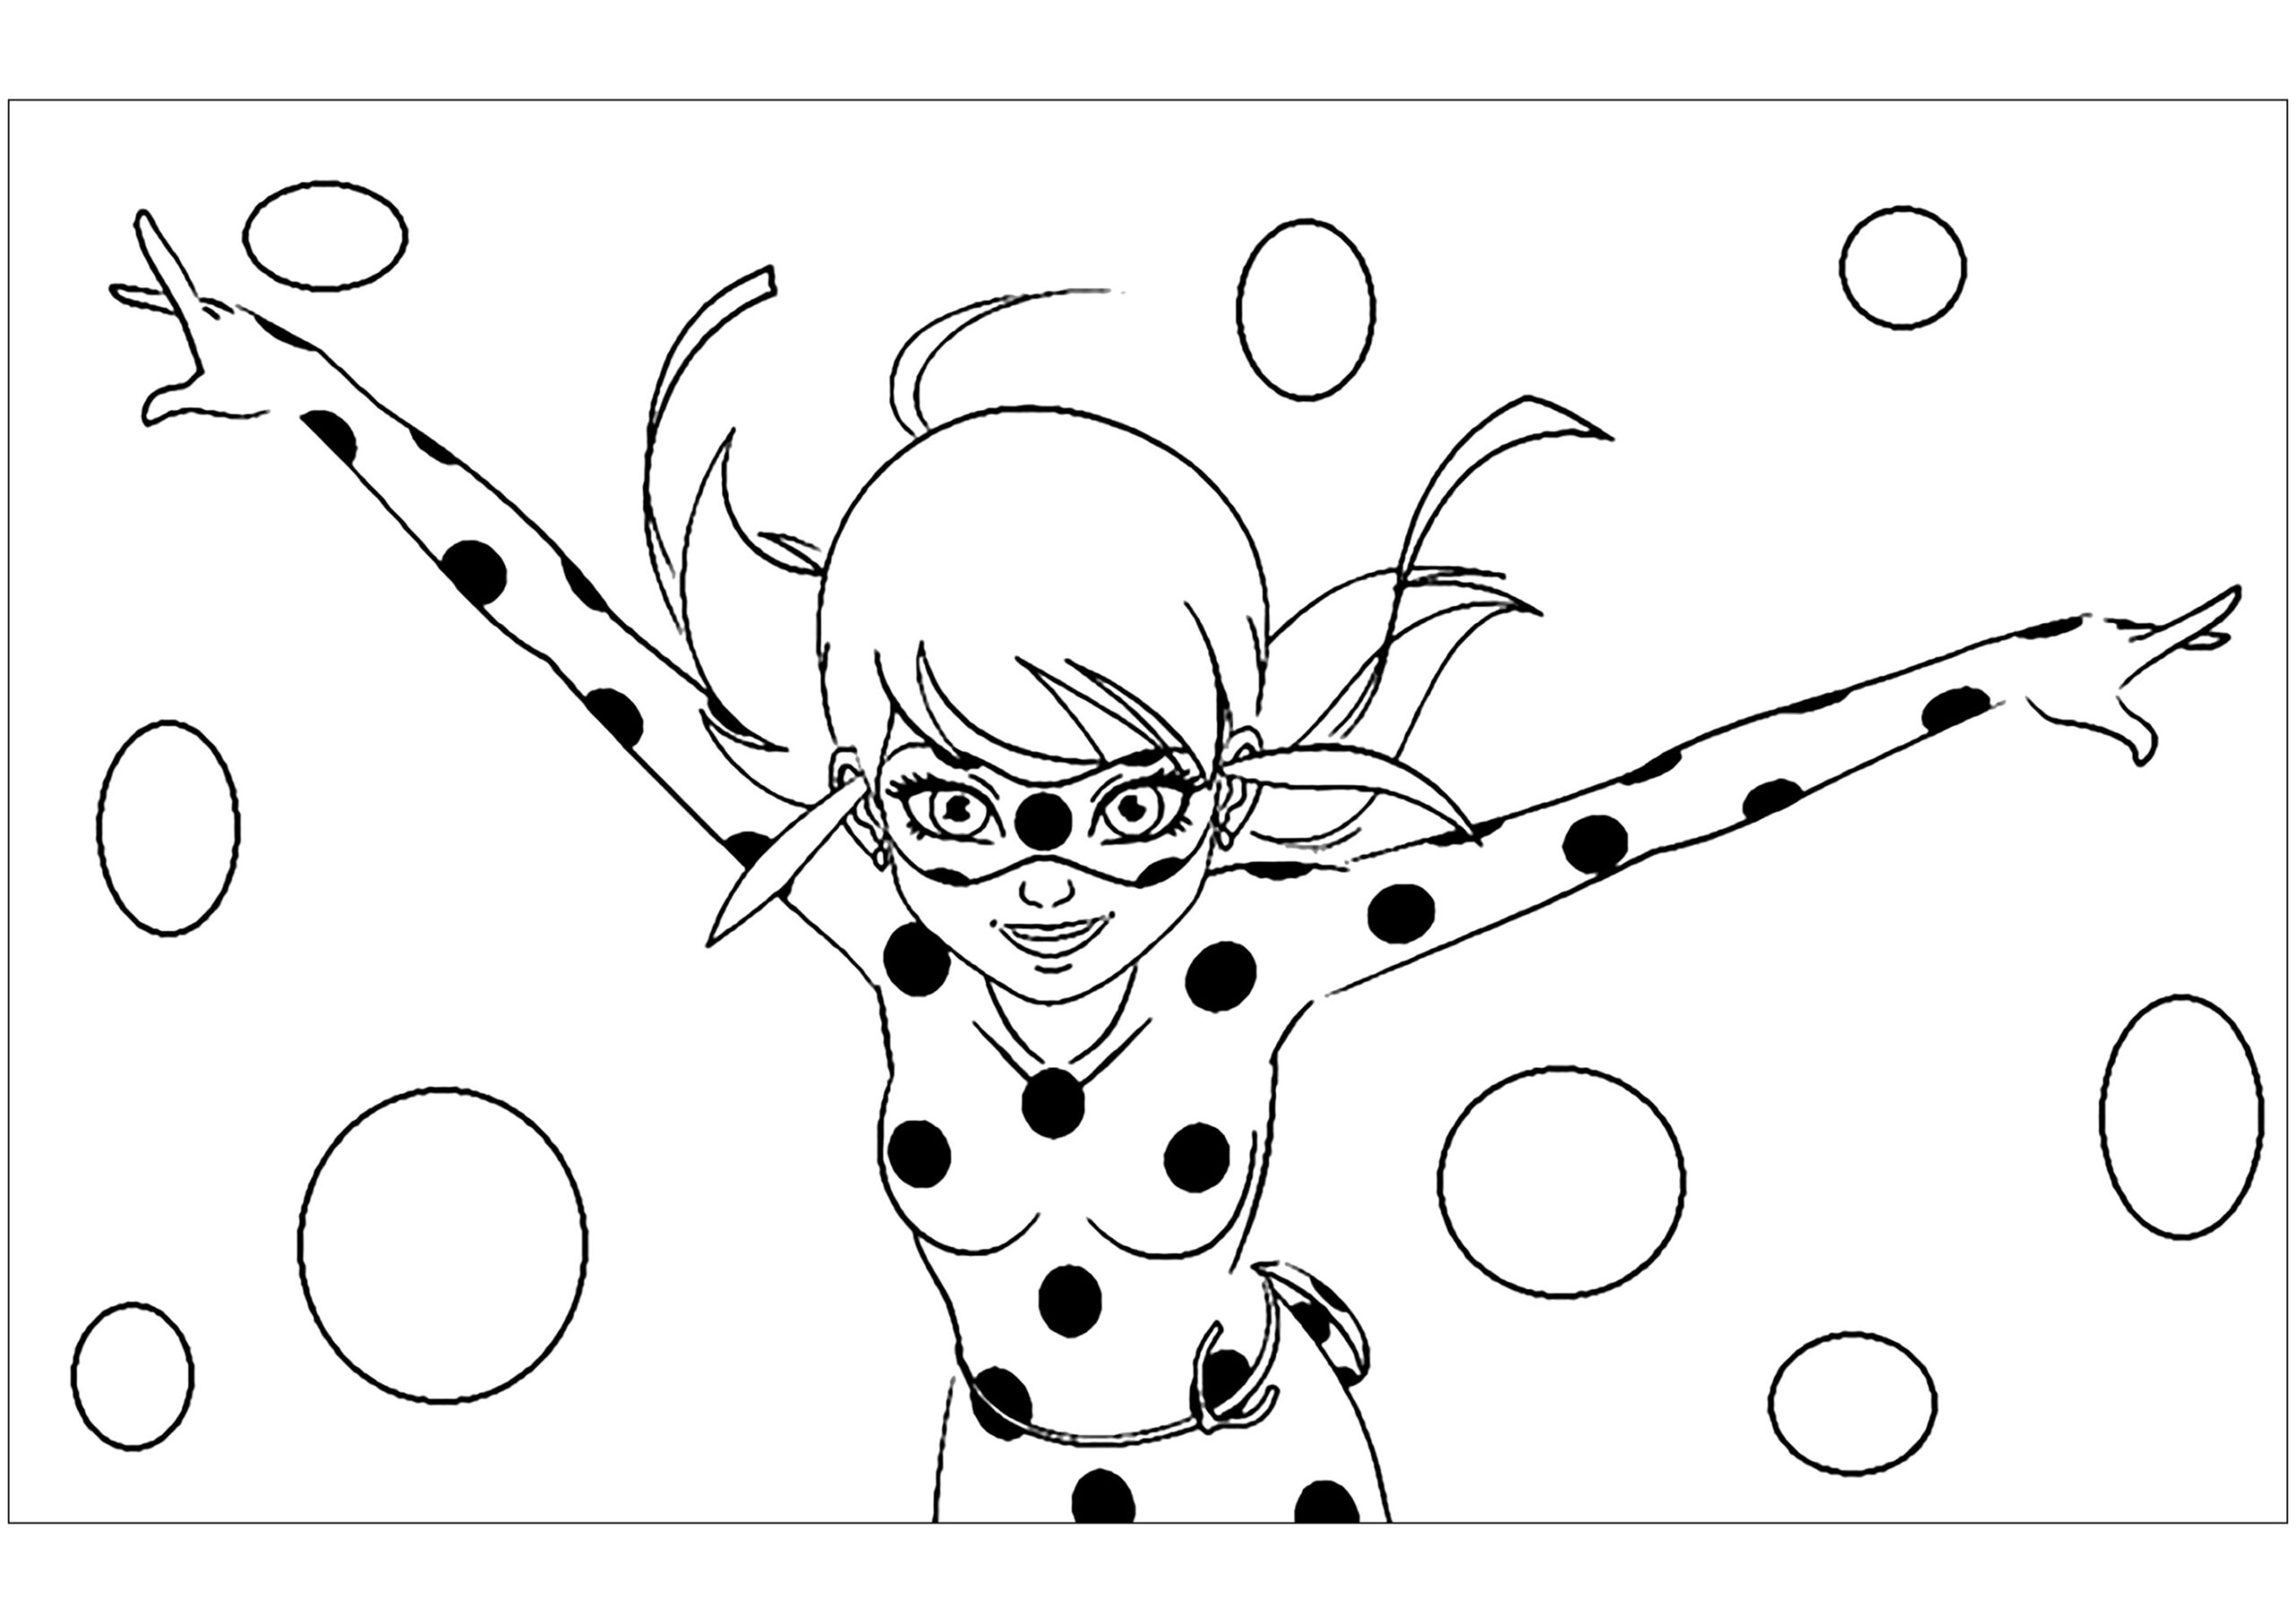 Coloriage Lady Bug / Miraculous - Coloriage Miraculous / Lady Bug Pour à Coloriages À Imprimer Miraculous